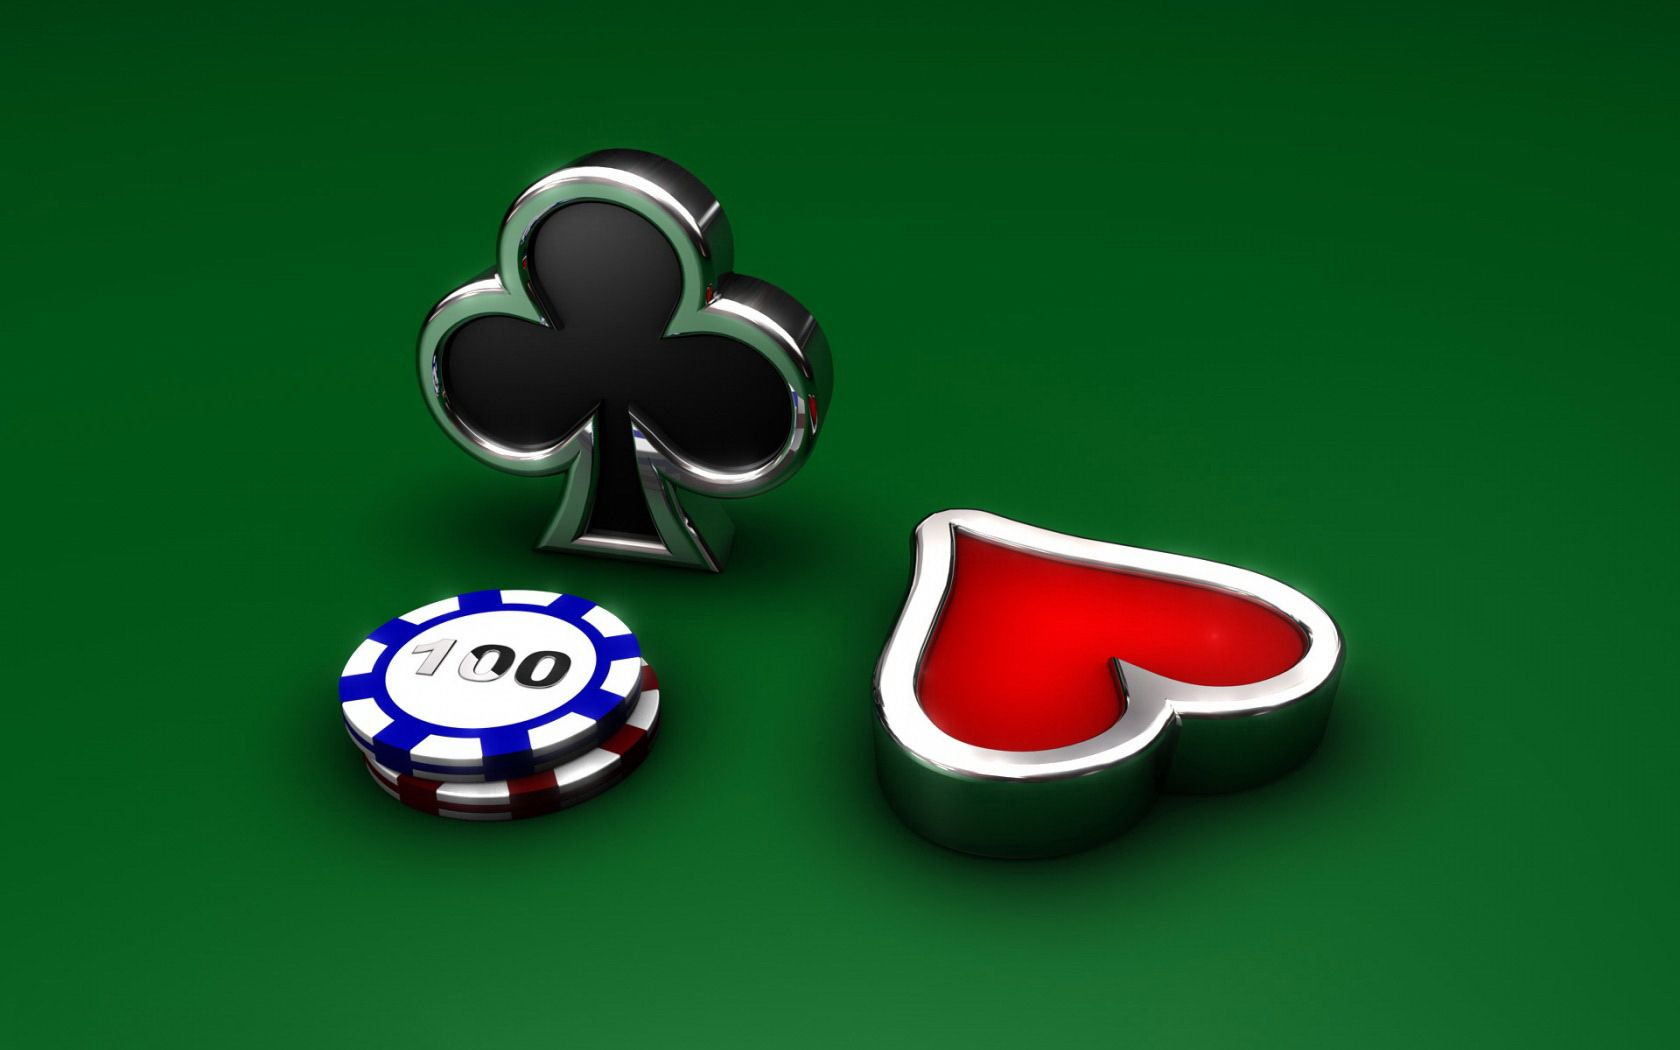 Phenomenal Hit with Moderate Payout Reaches Live Slots